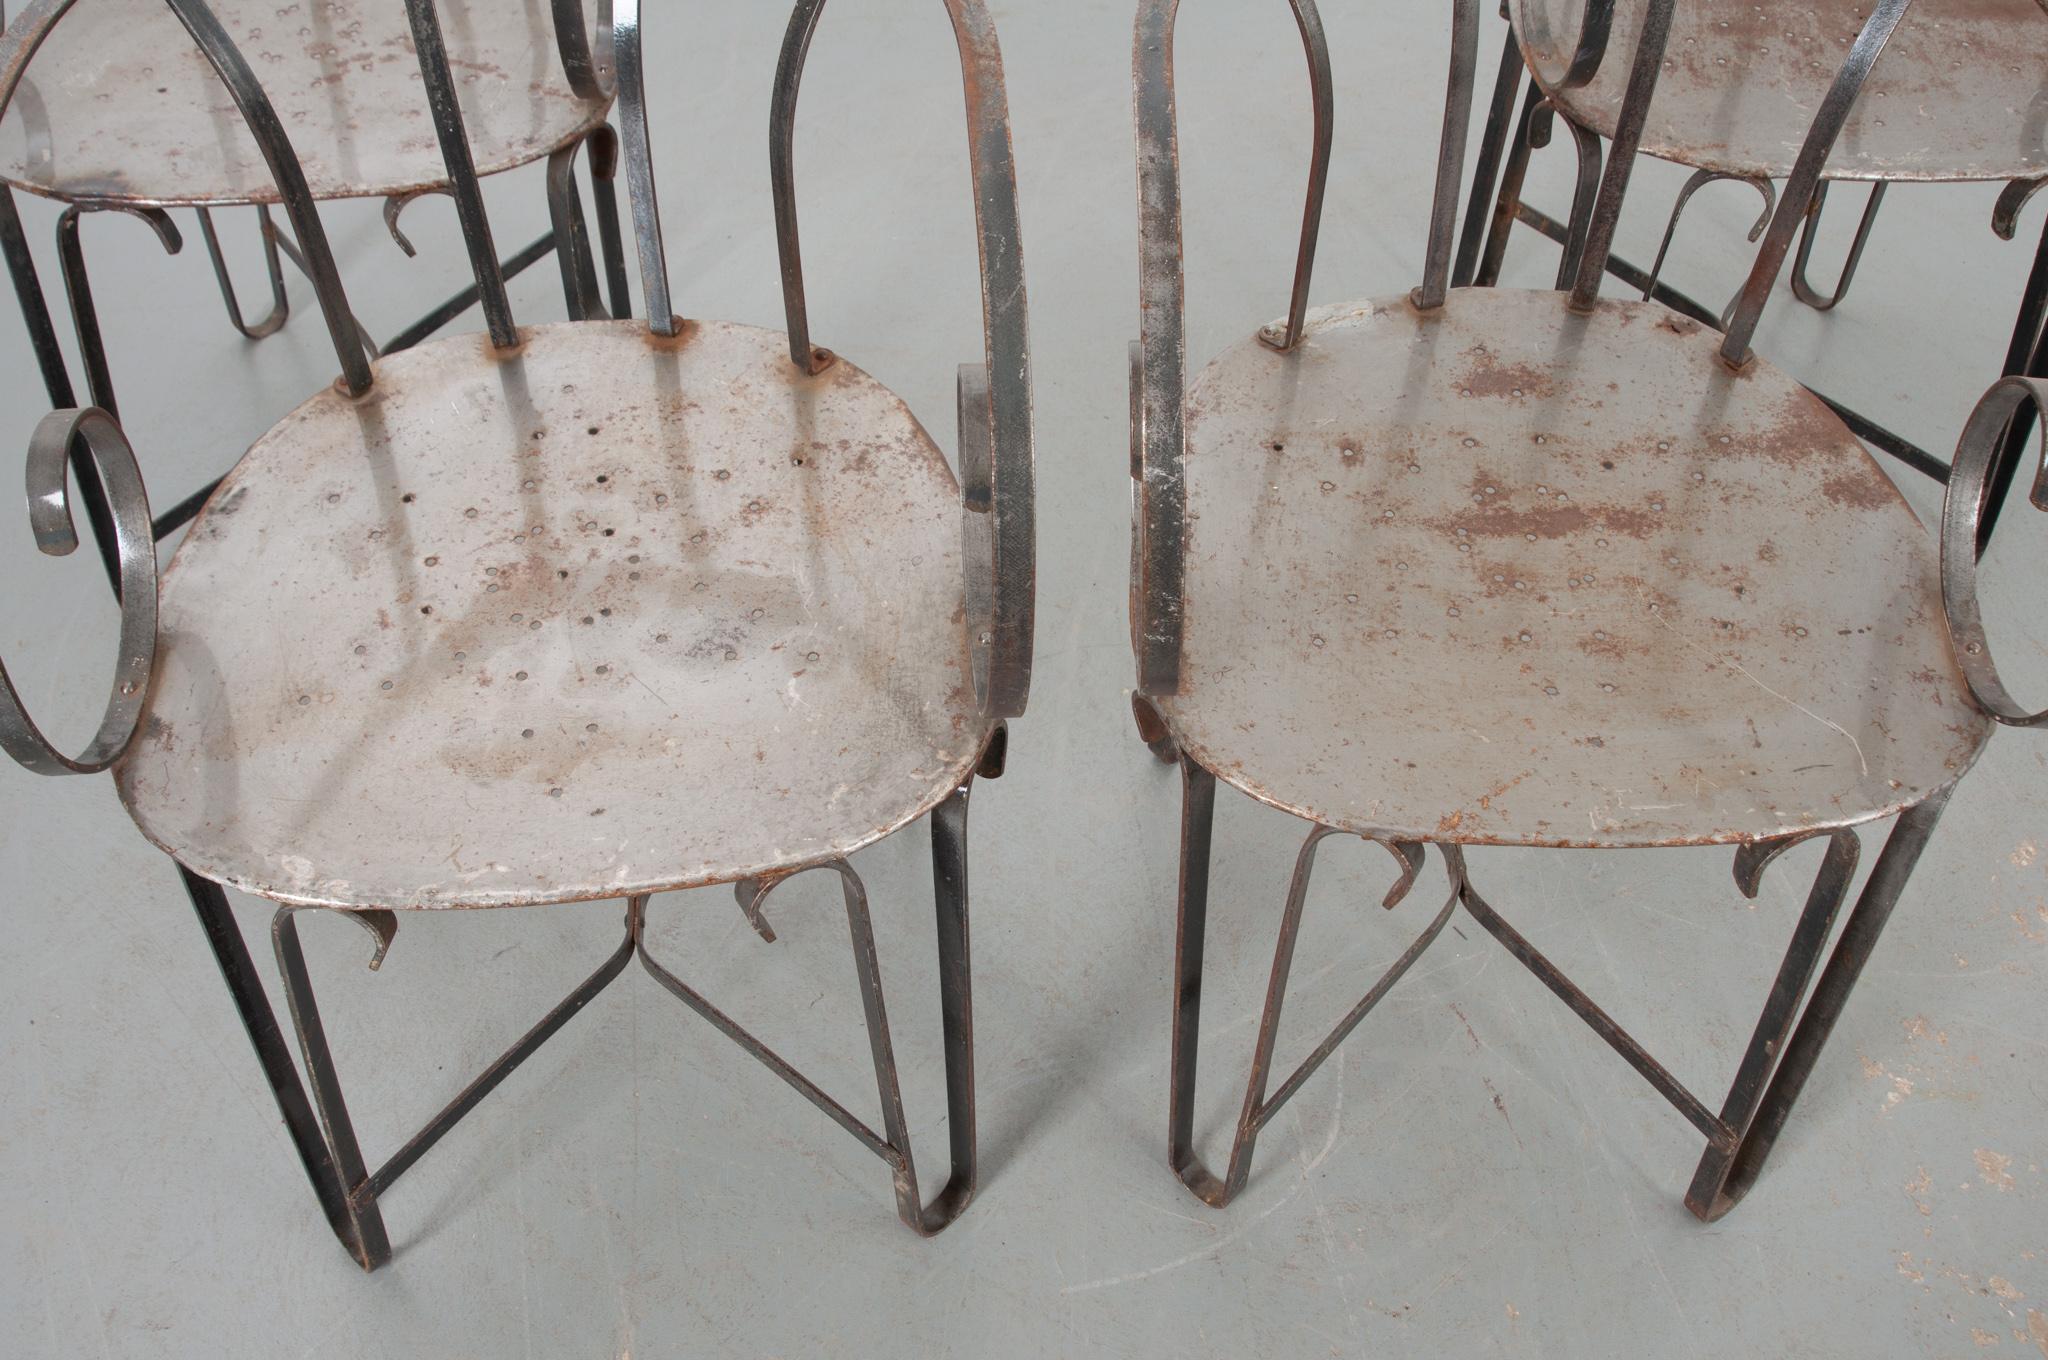 Forged Set of 4 Vintage Scroll Arm Metal Chairs